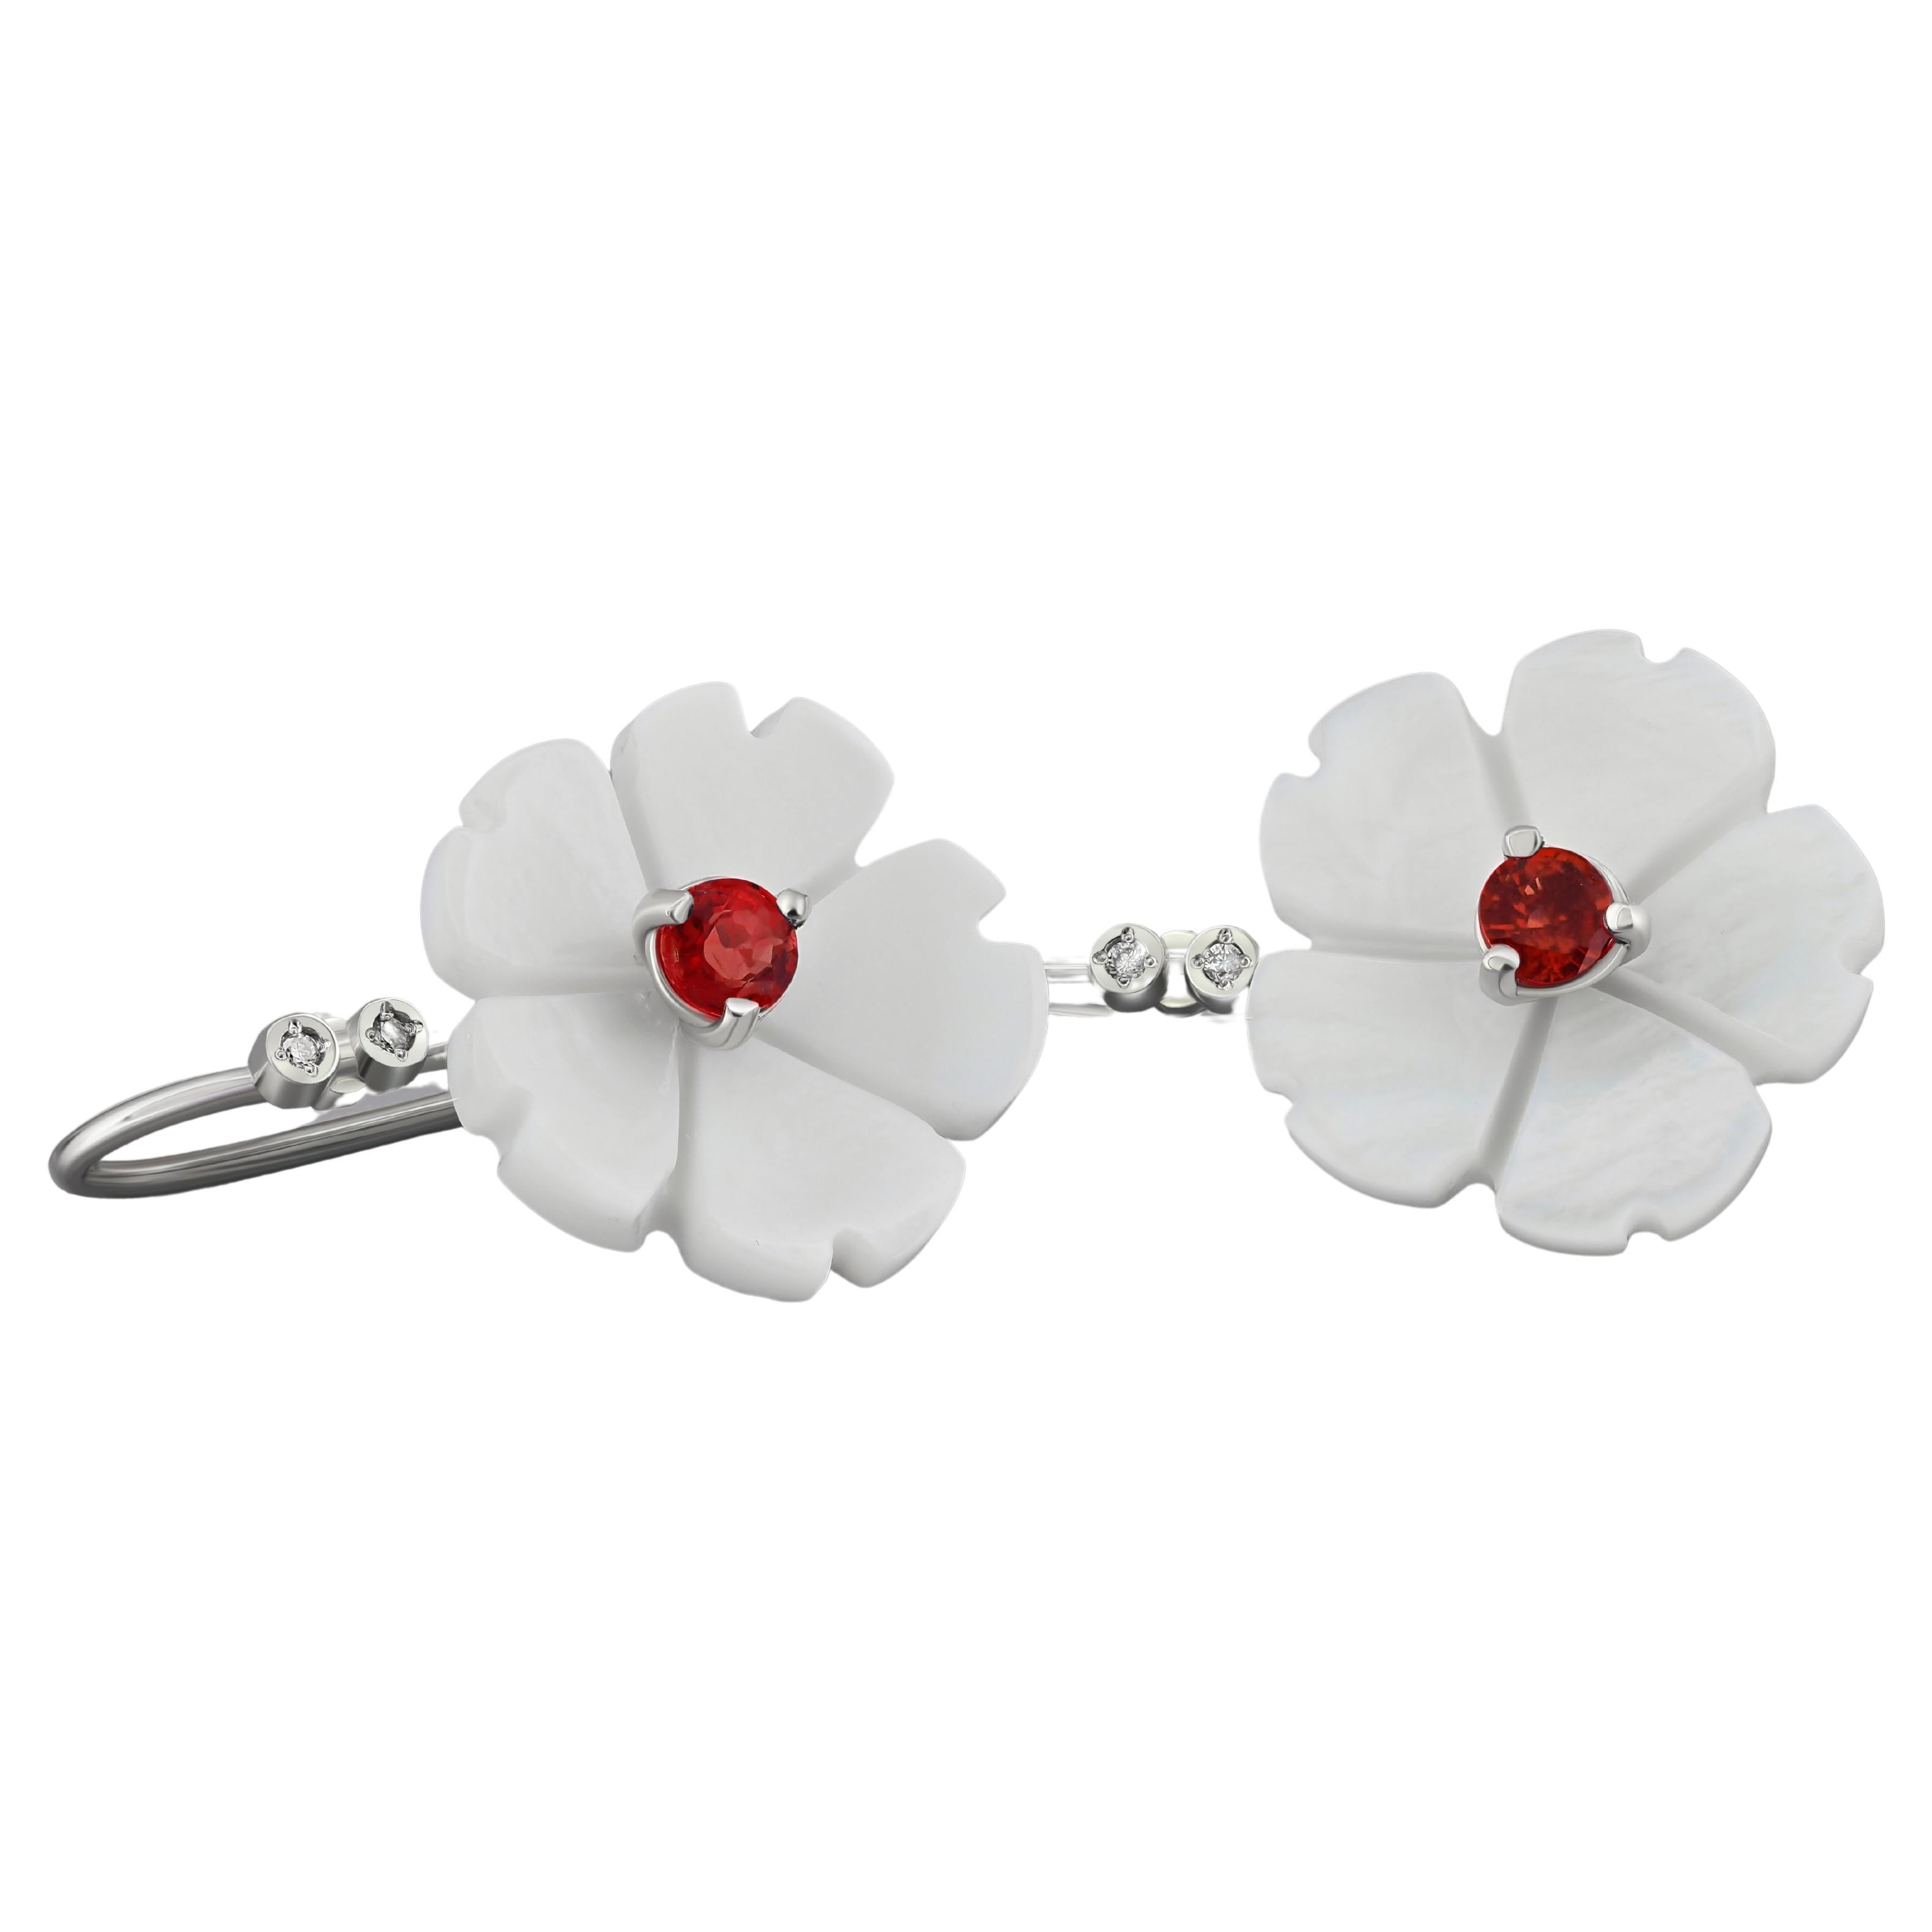 Flower 14k Gold Earrings with Garnet, Garnet and Carved Mother of Pearl Earrings For Sale